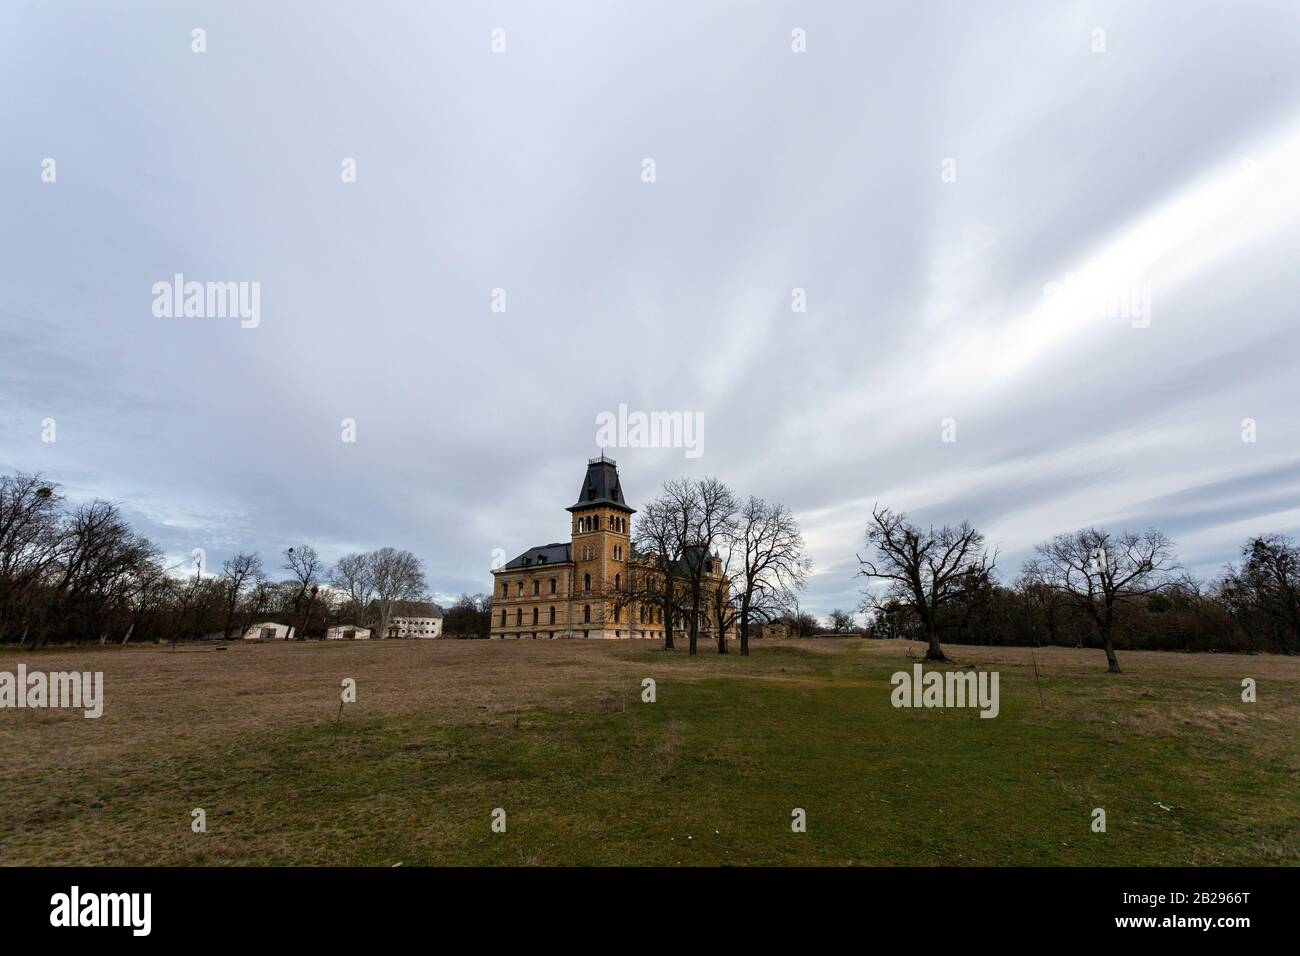 The abandoned Kegl castle in Csalapuszta, Hungary on a winter day. Stock Photo